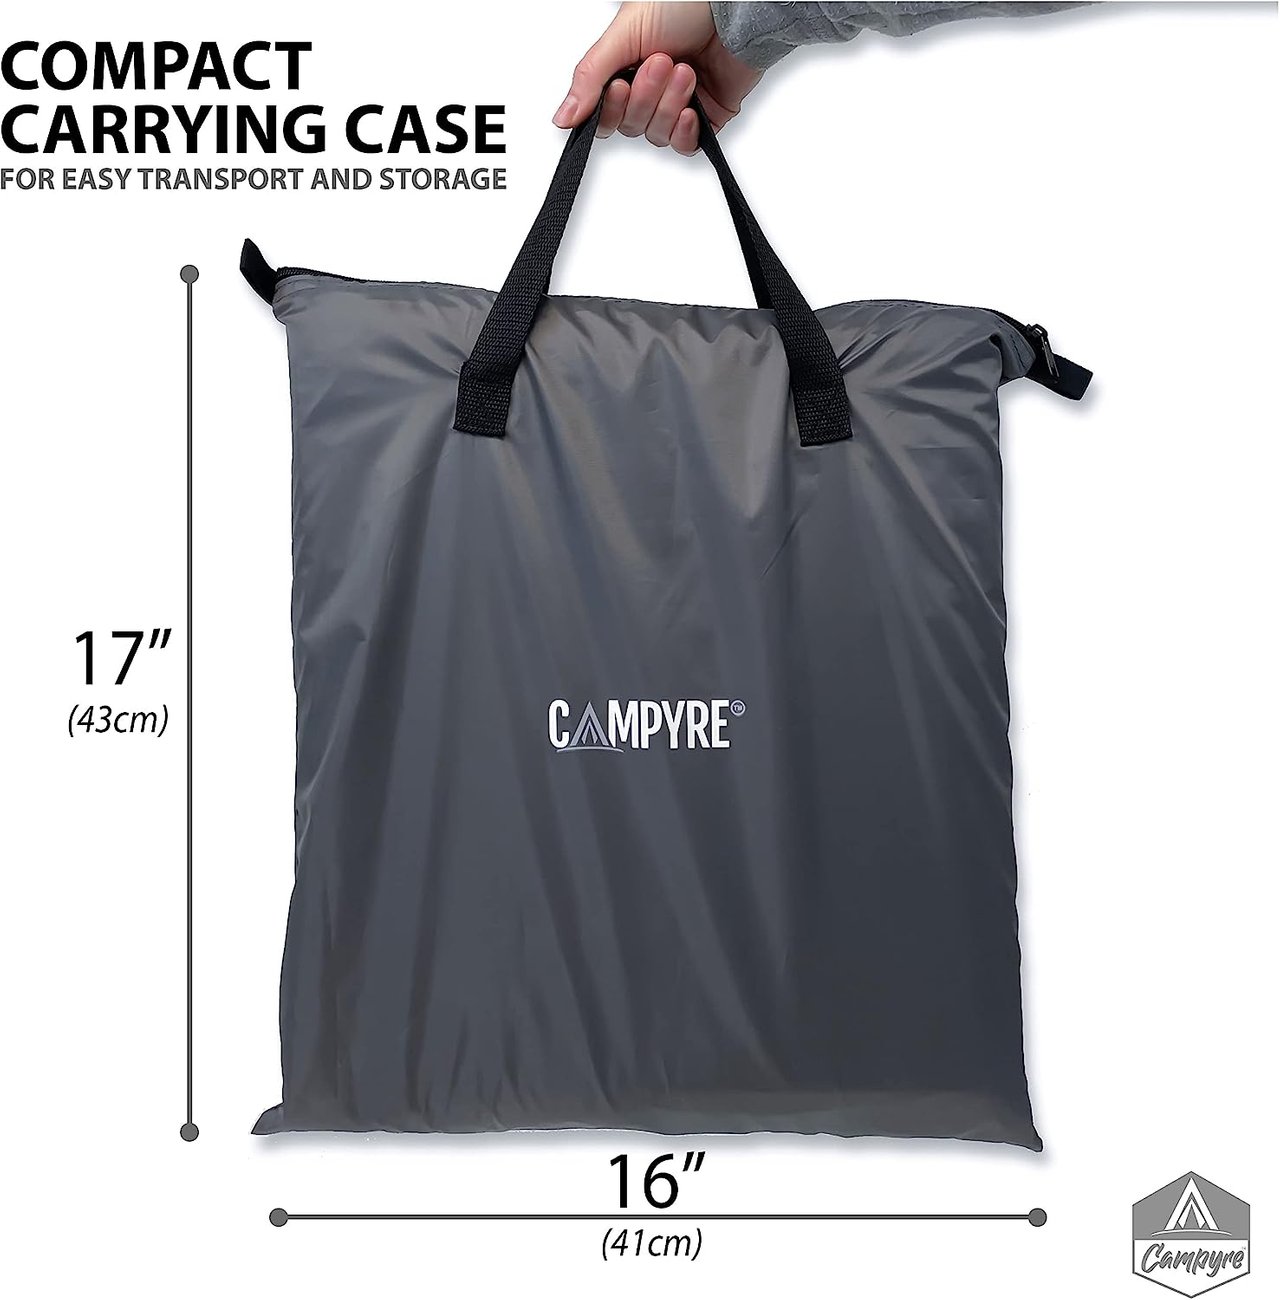 1 CAMPYRE - Compact Camping Organizer with Zippered Flap, 9-Shelf Storage. Ideal for Tent, RV, or any Outdoor Gear Organization (Patented - Licensed)